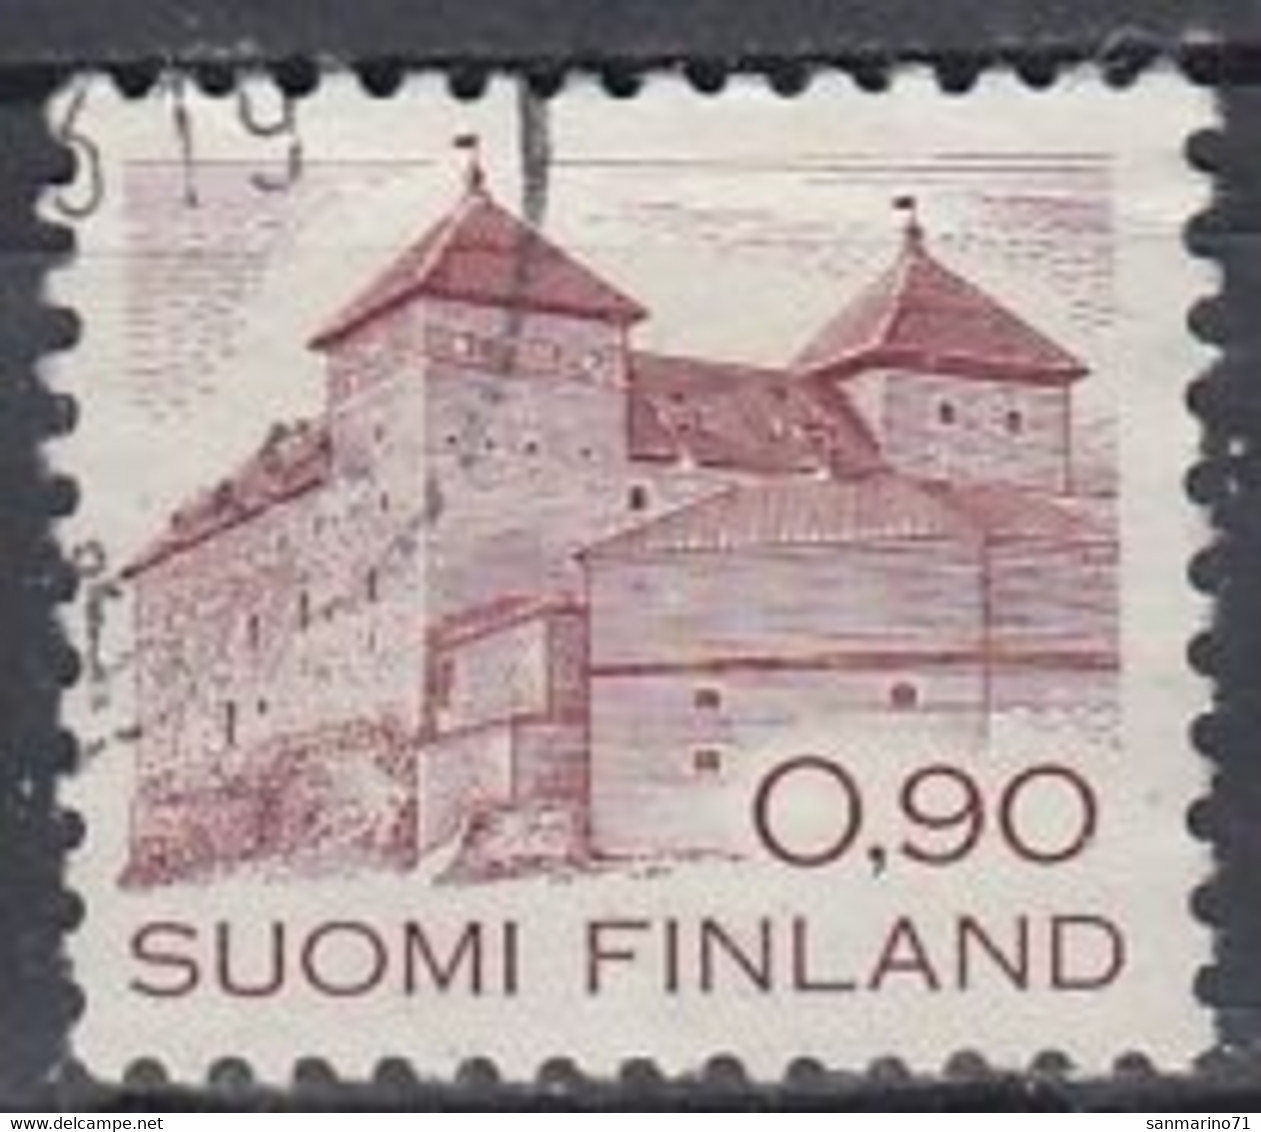 FINLAND 891,used,falc Hinged - Châteaux